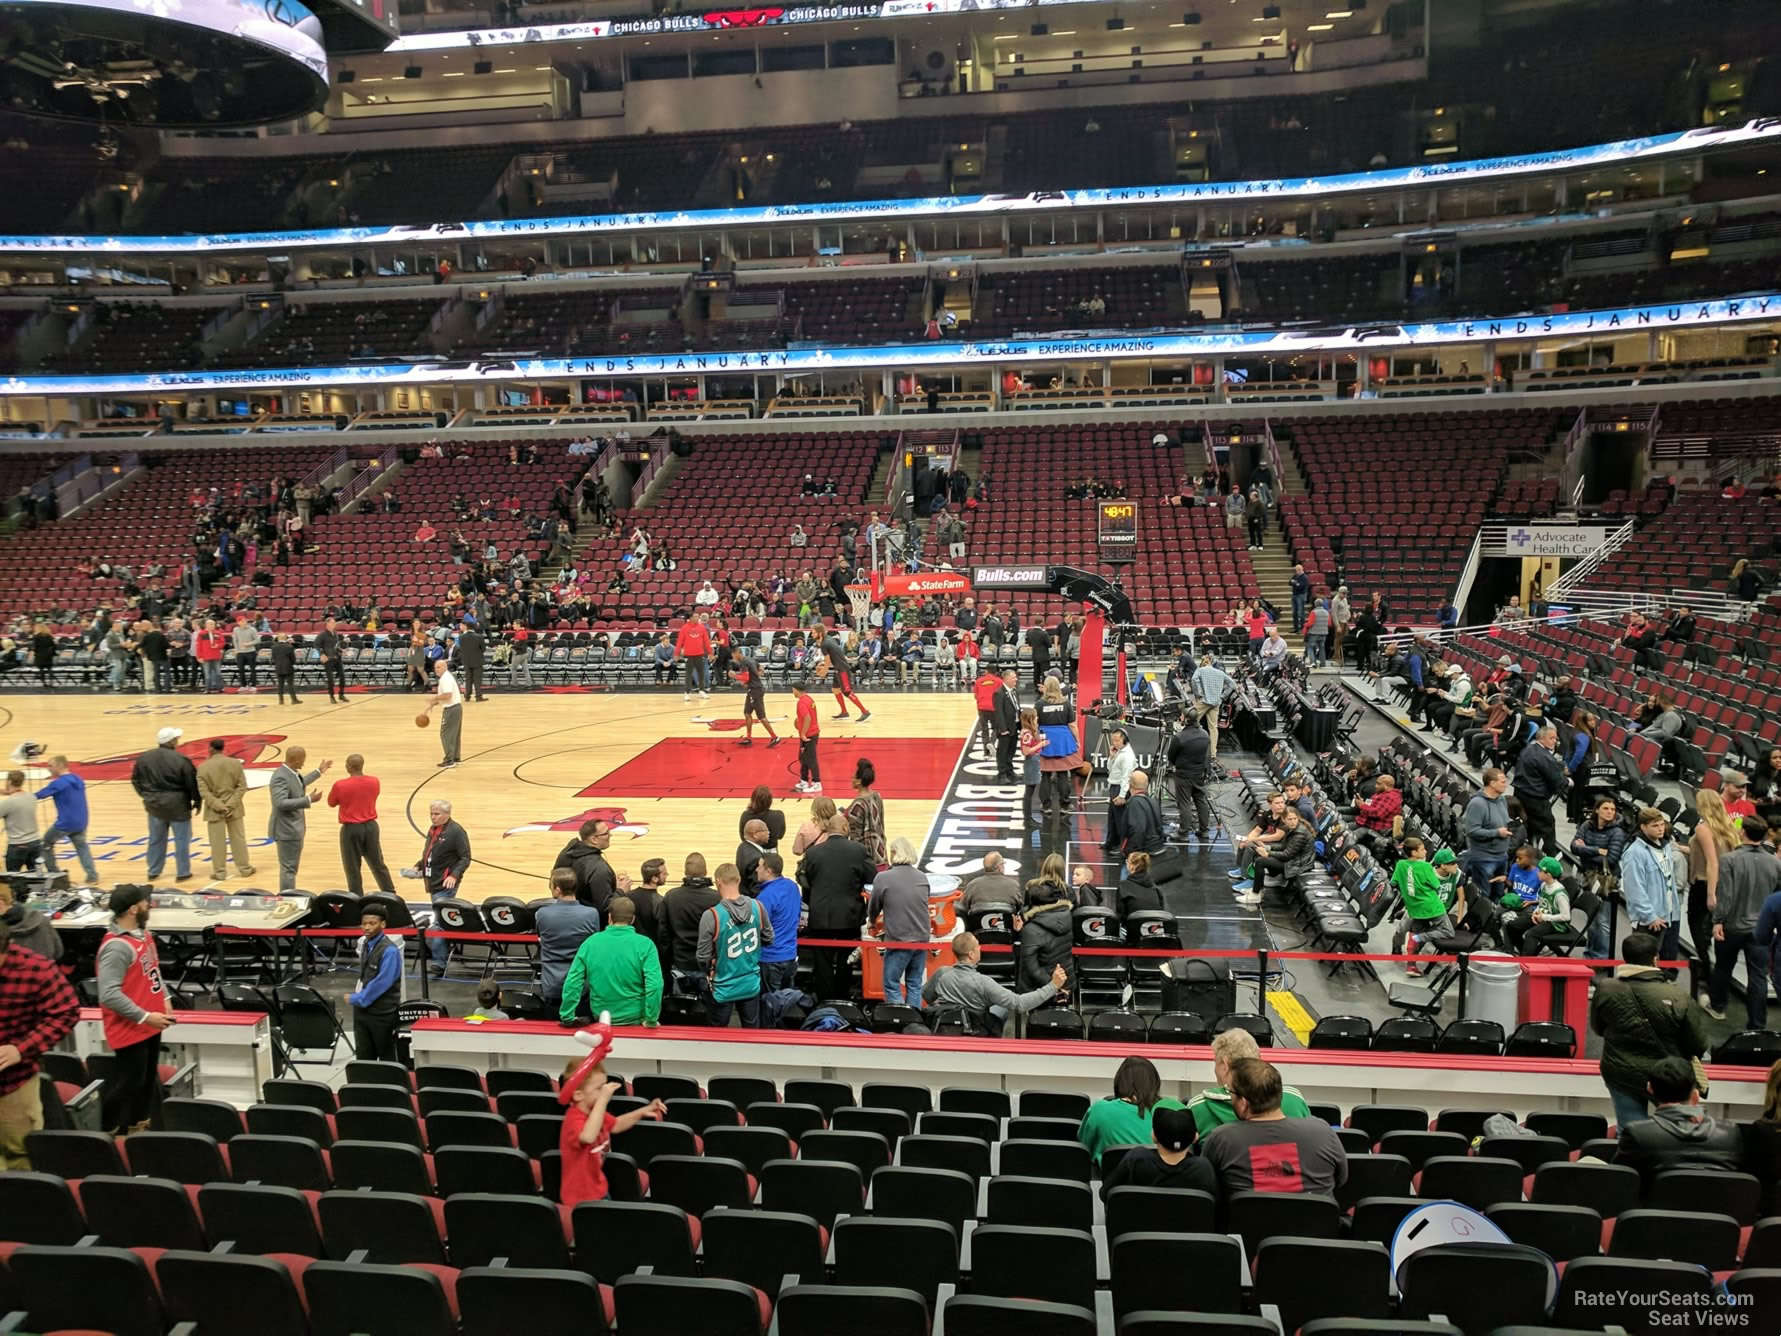 Section 121 at United Center - RateYourSeats.com